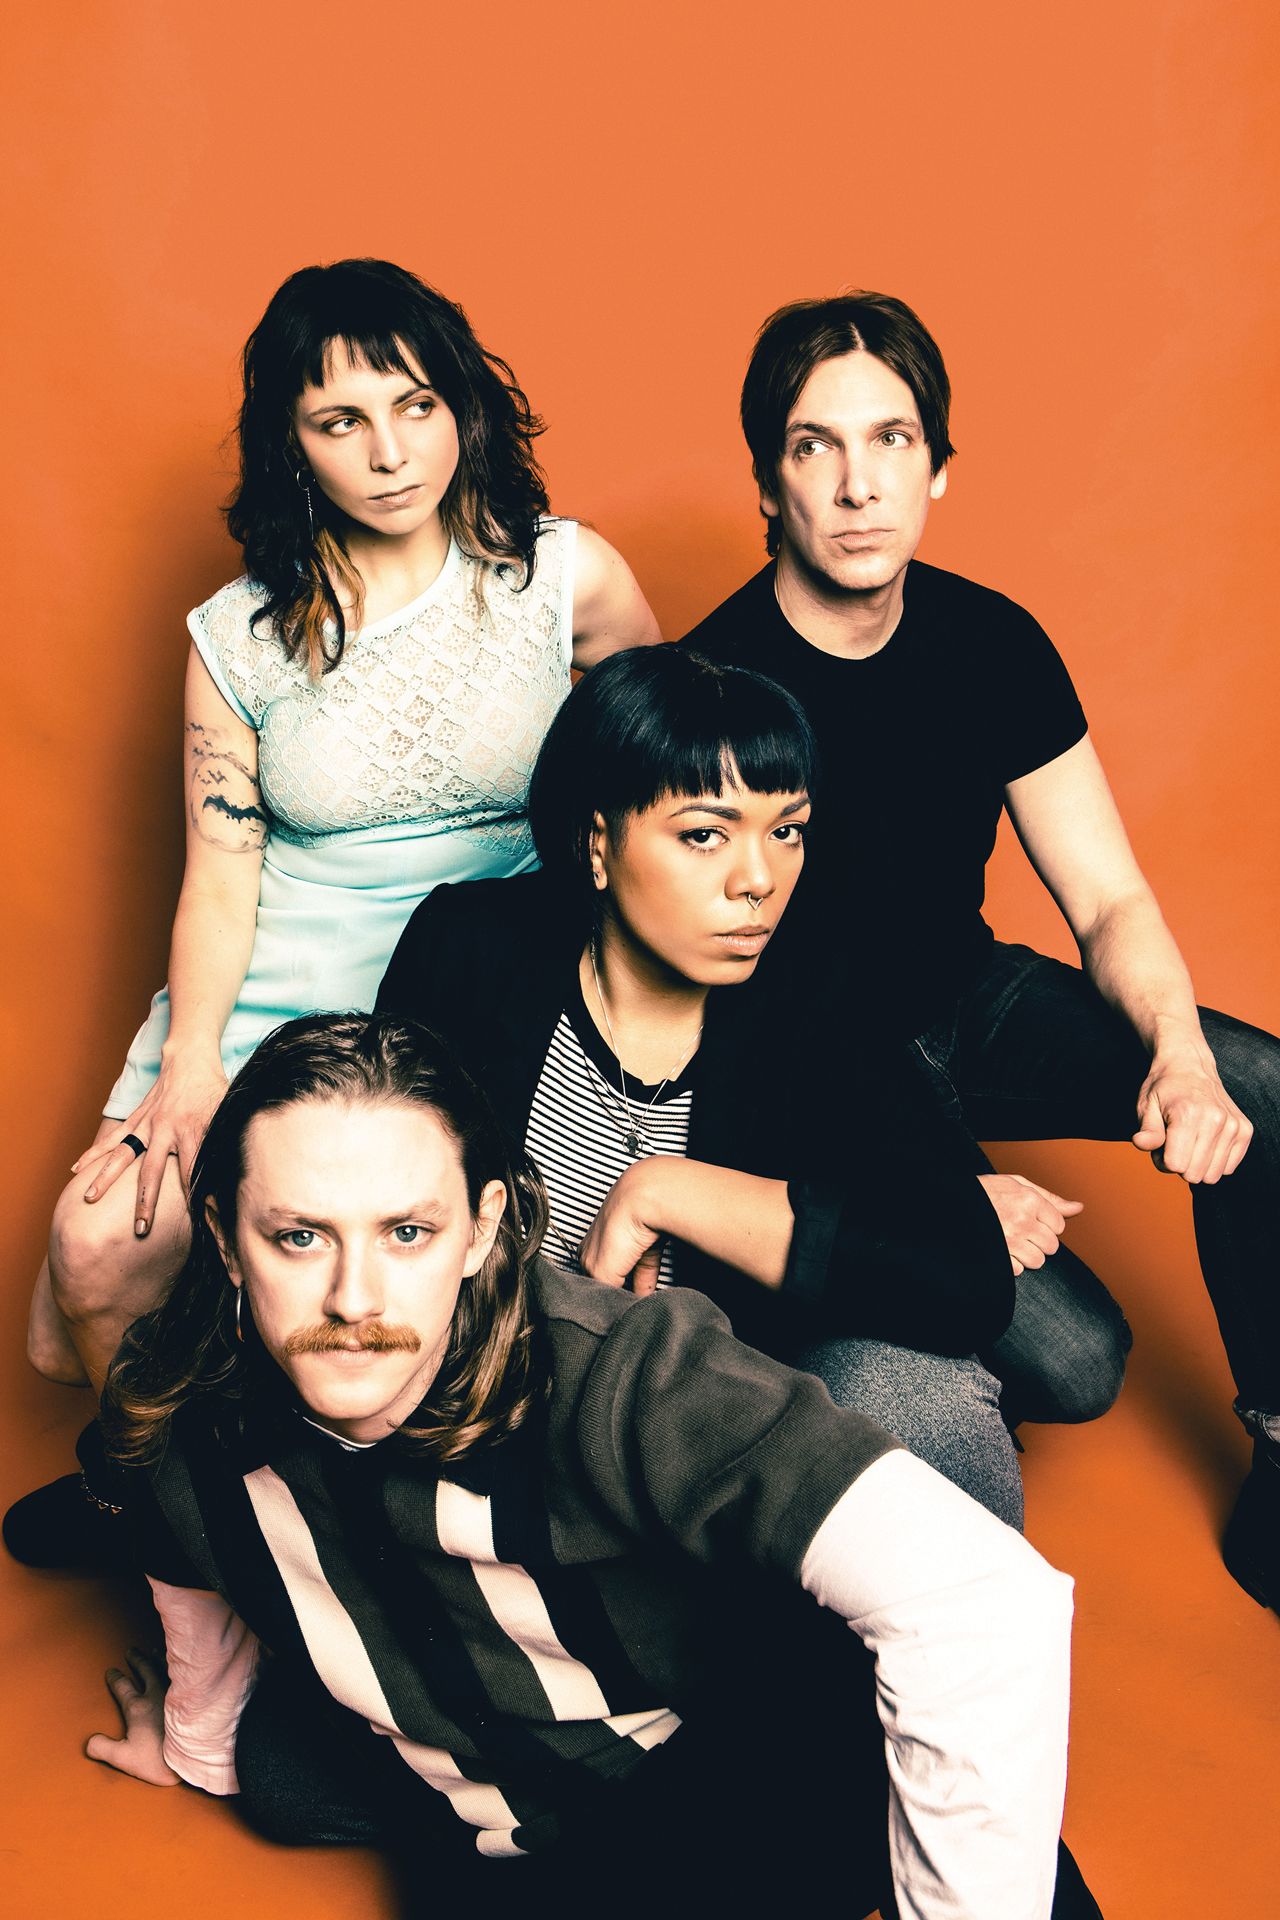 A band portrait of four musicians posing in front of an orange background